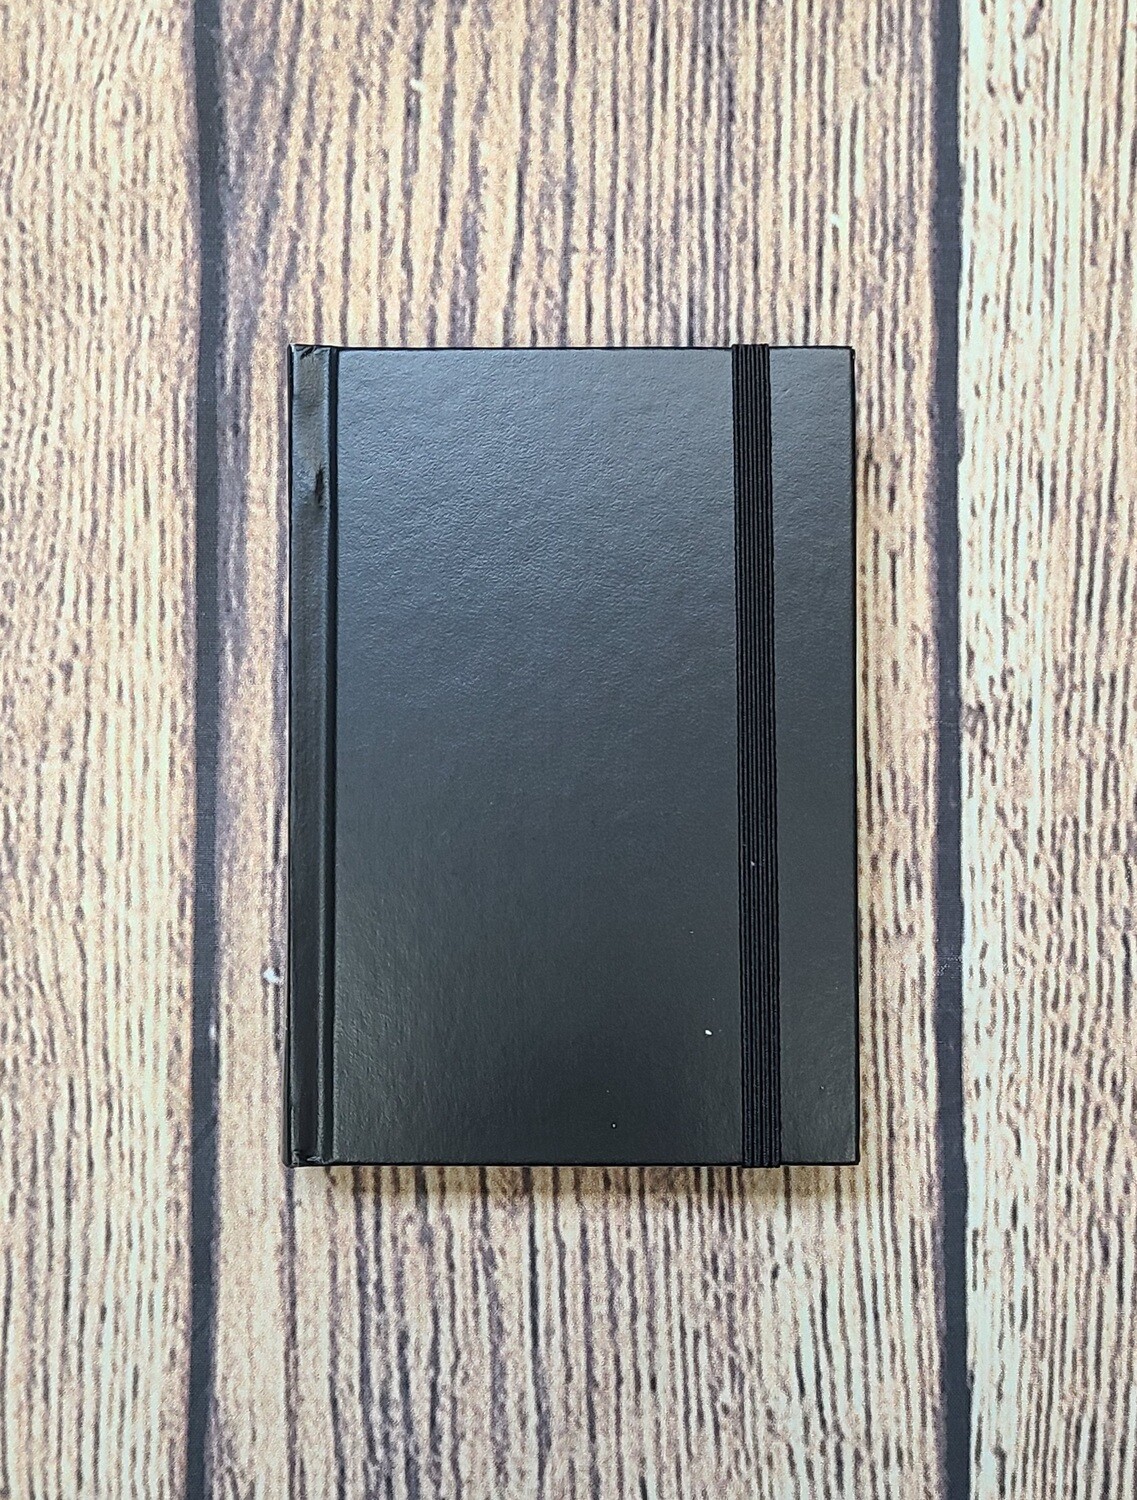 ESV Large Print Compact Bible - Black Hardcover with Strap